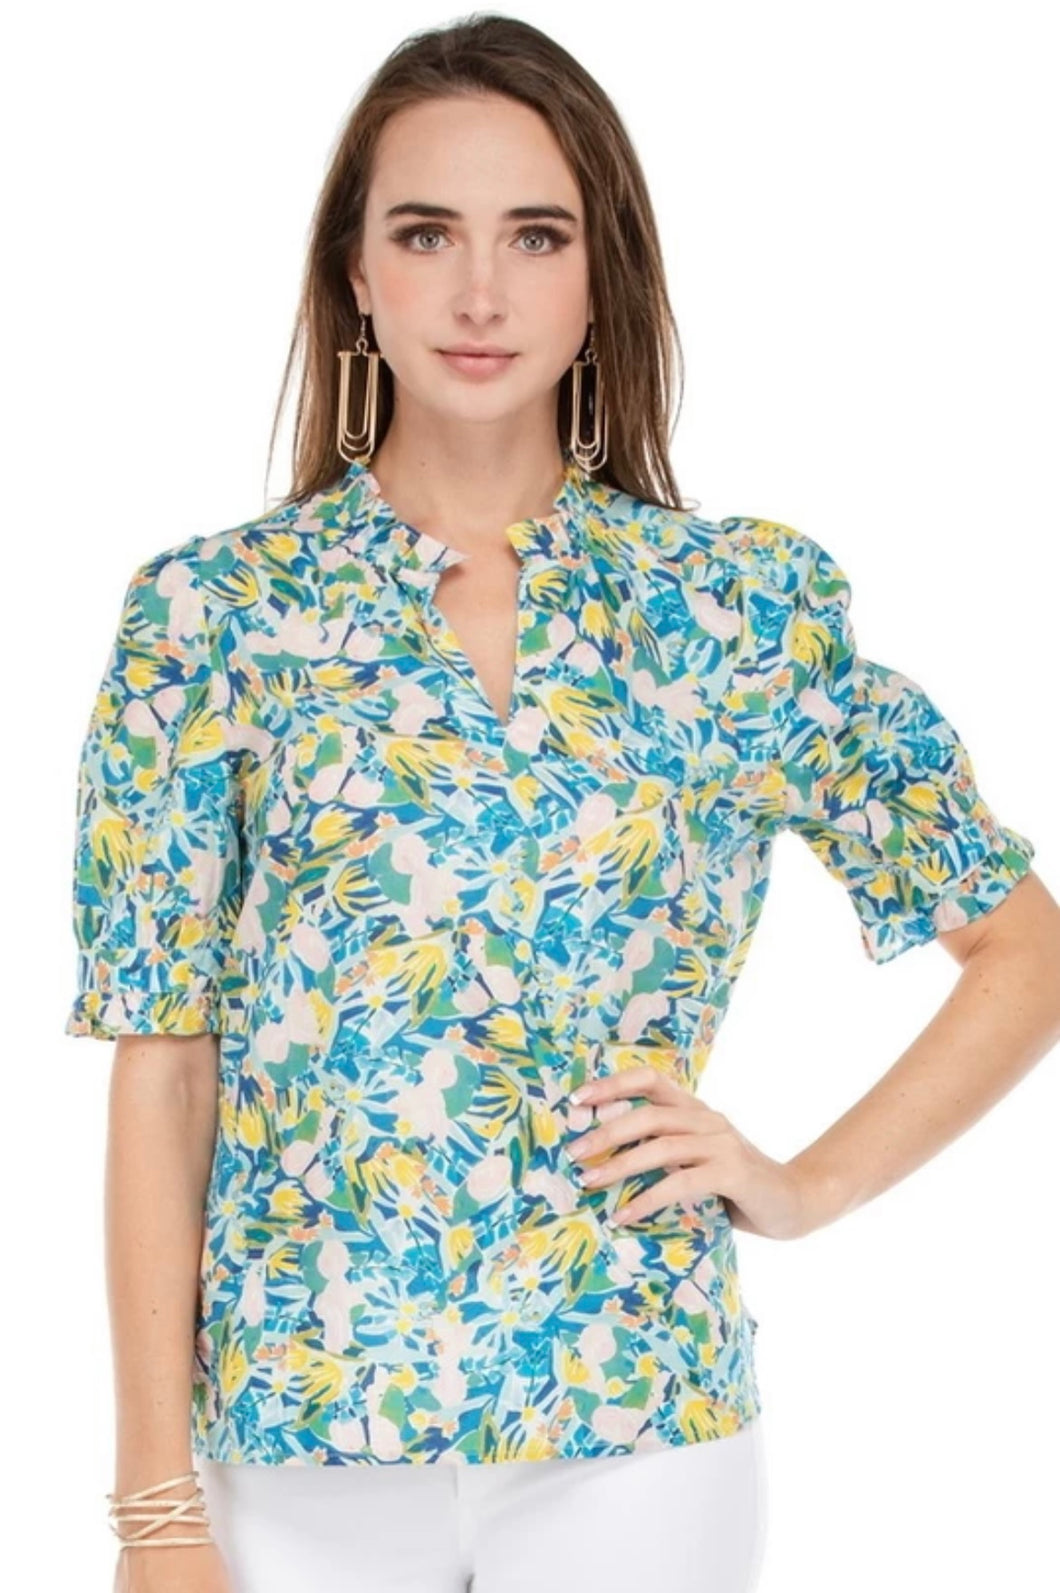 Ruffle SS Blouse in Turquoise Floral